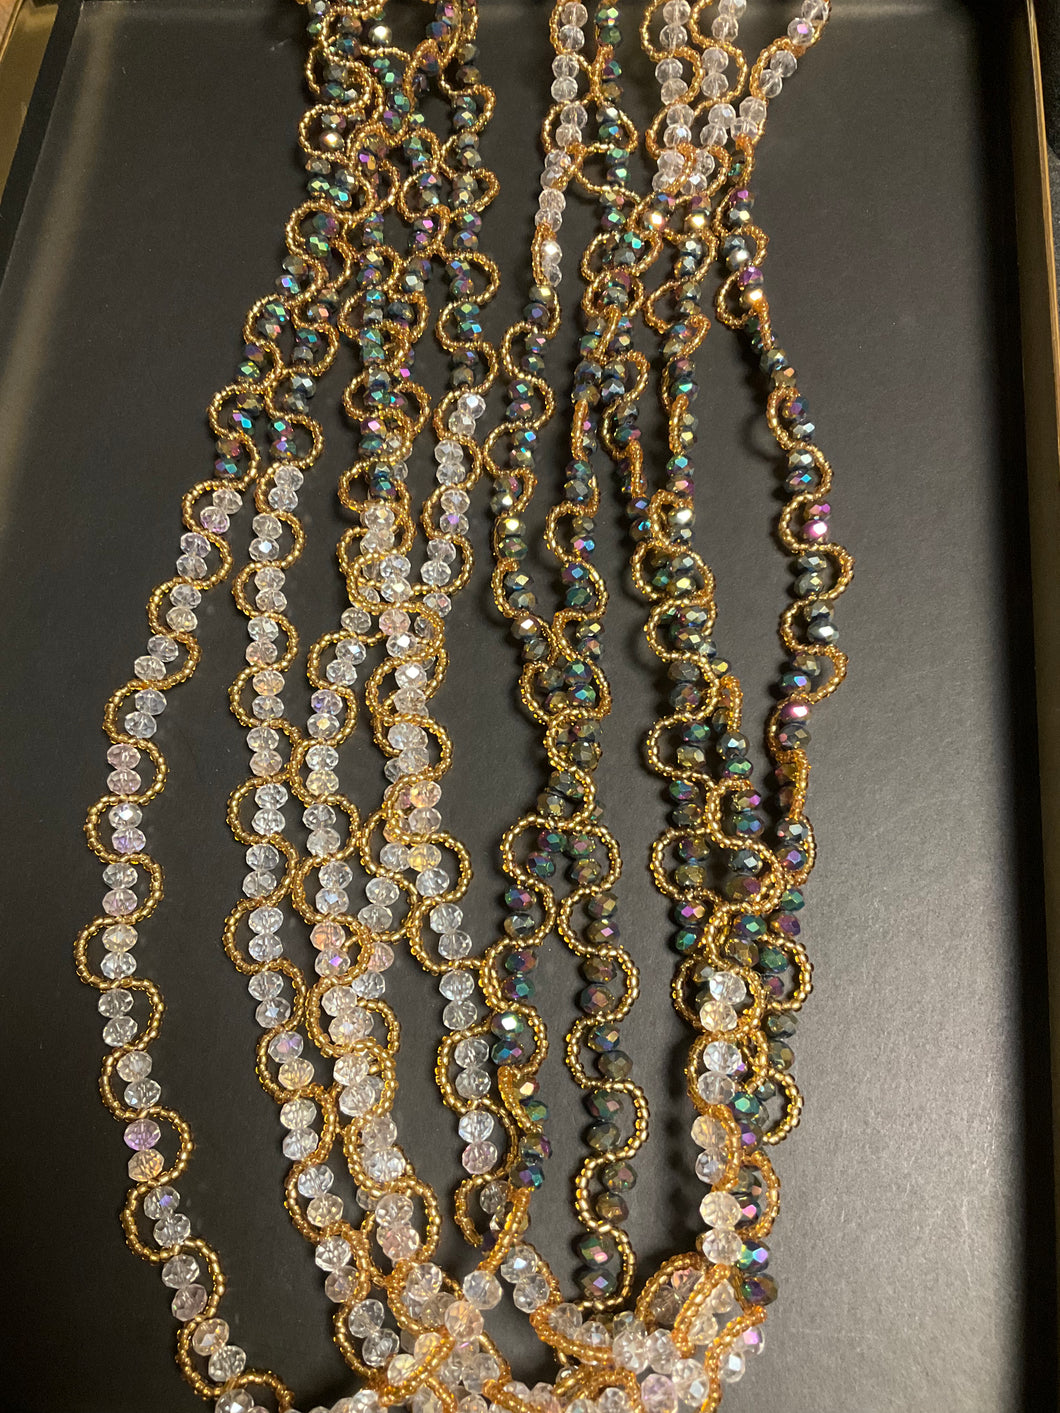 Radiant New Ghana Crystal Waistbead - 3 Vibrant Colors, Clasped Closure - 38” to 49” Red, Gold, Blue, Clear, Purple Iridescent.